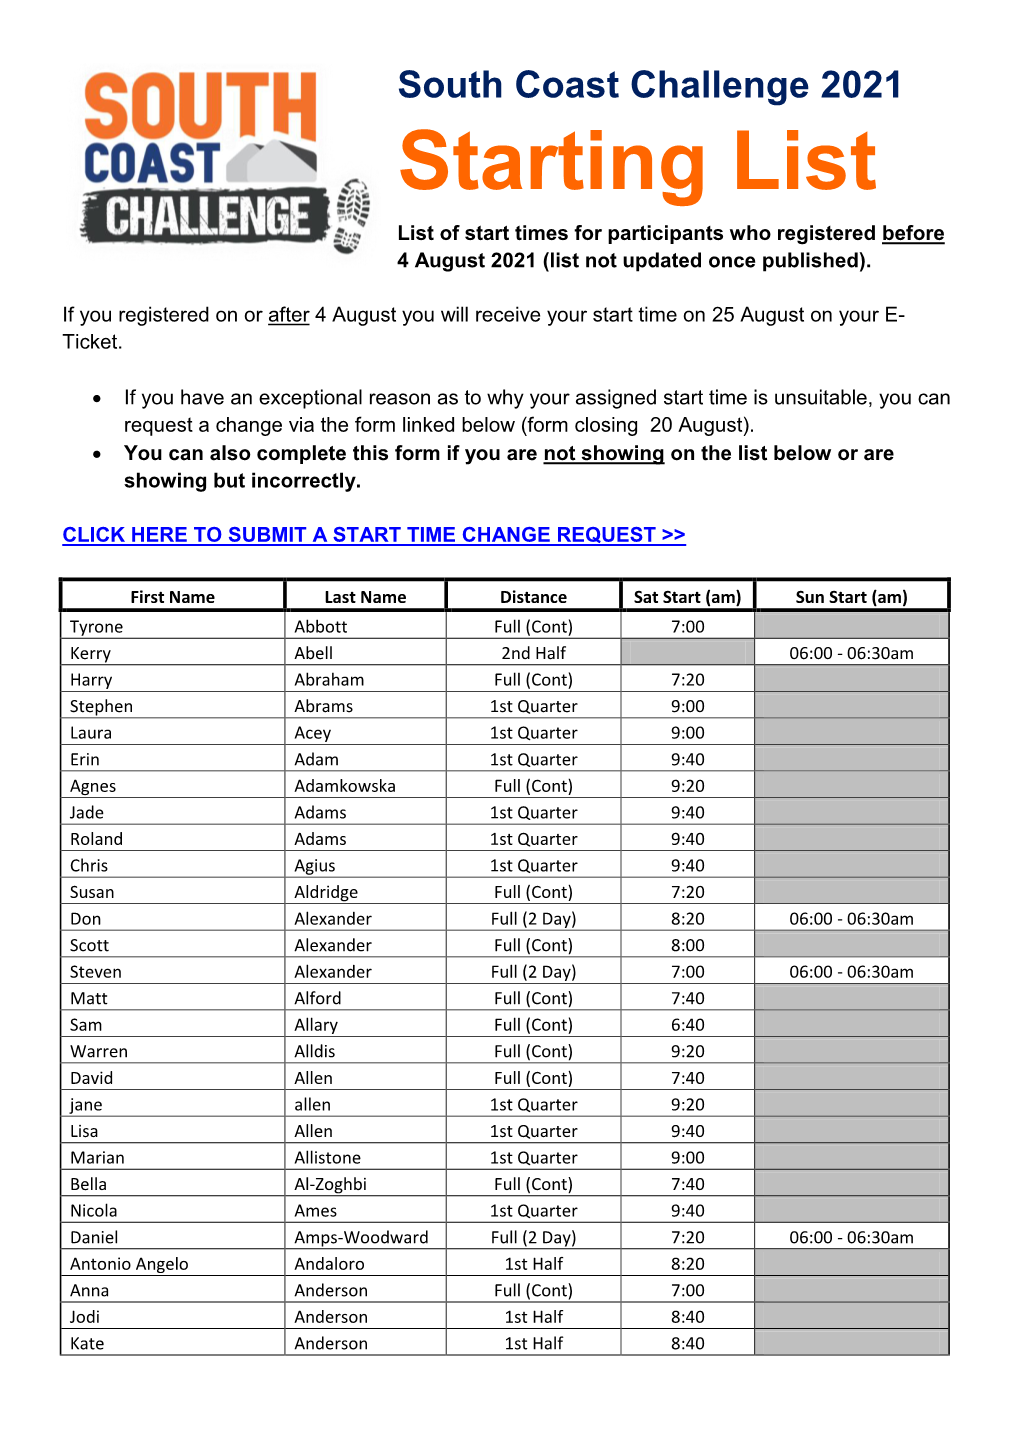 South Coast Challenge 2021 Starting List List of Start Times for Participants Who Registered Before 4 August 2021 (List Not Updated Once Published)